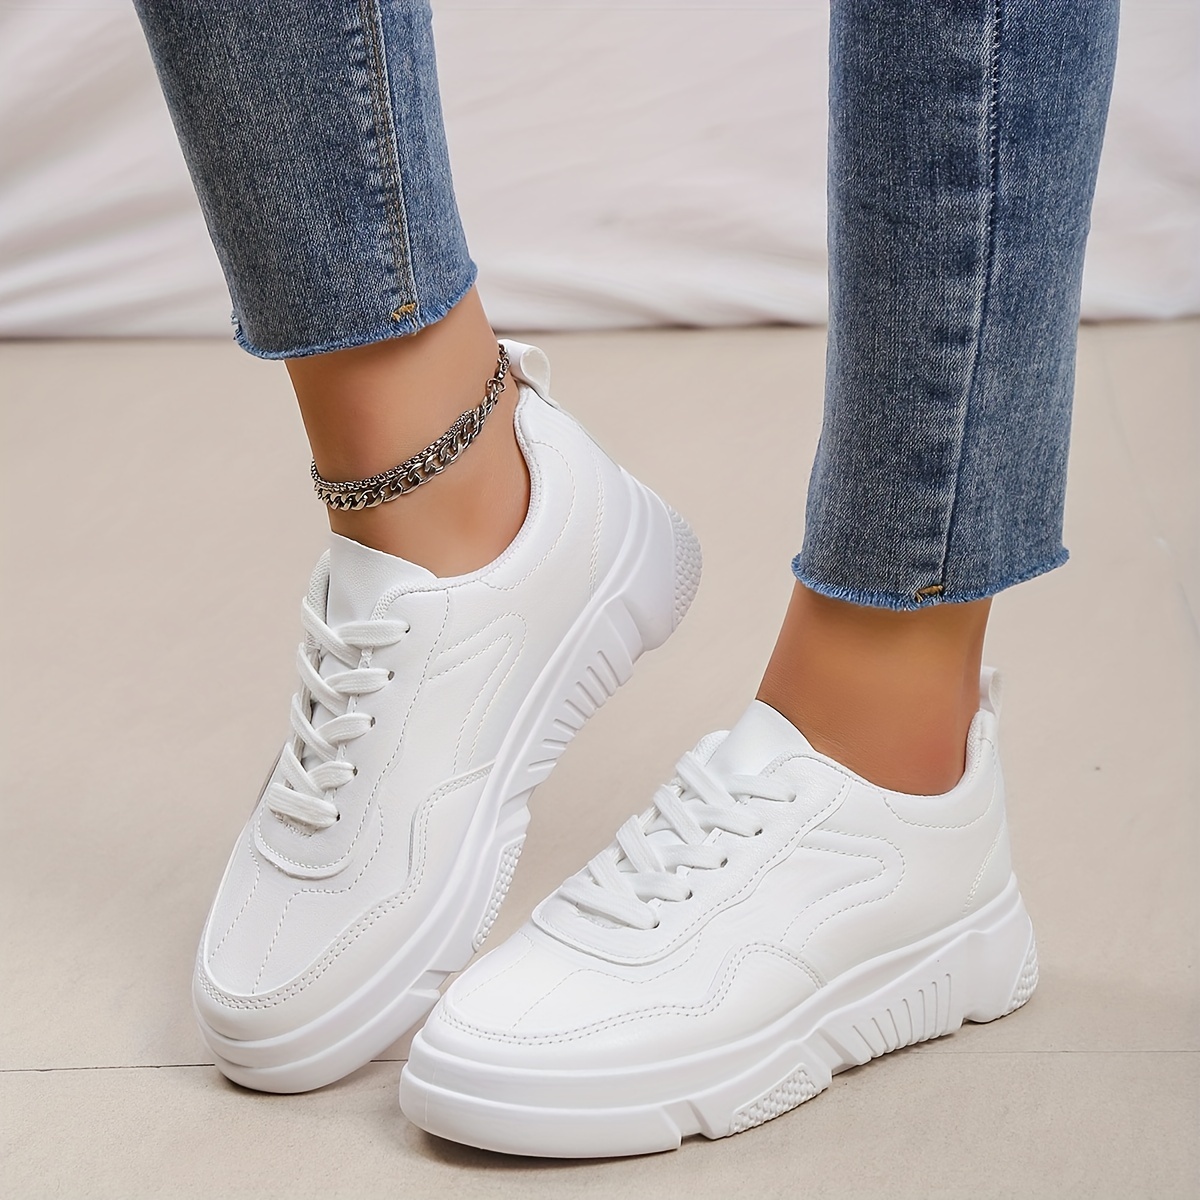 Women's Solid Color Casual Sneakers, Lace Up Low-top Round Toe Non-slip  Lightweight White Shoes, Versatile Comfy Trainers